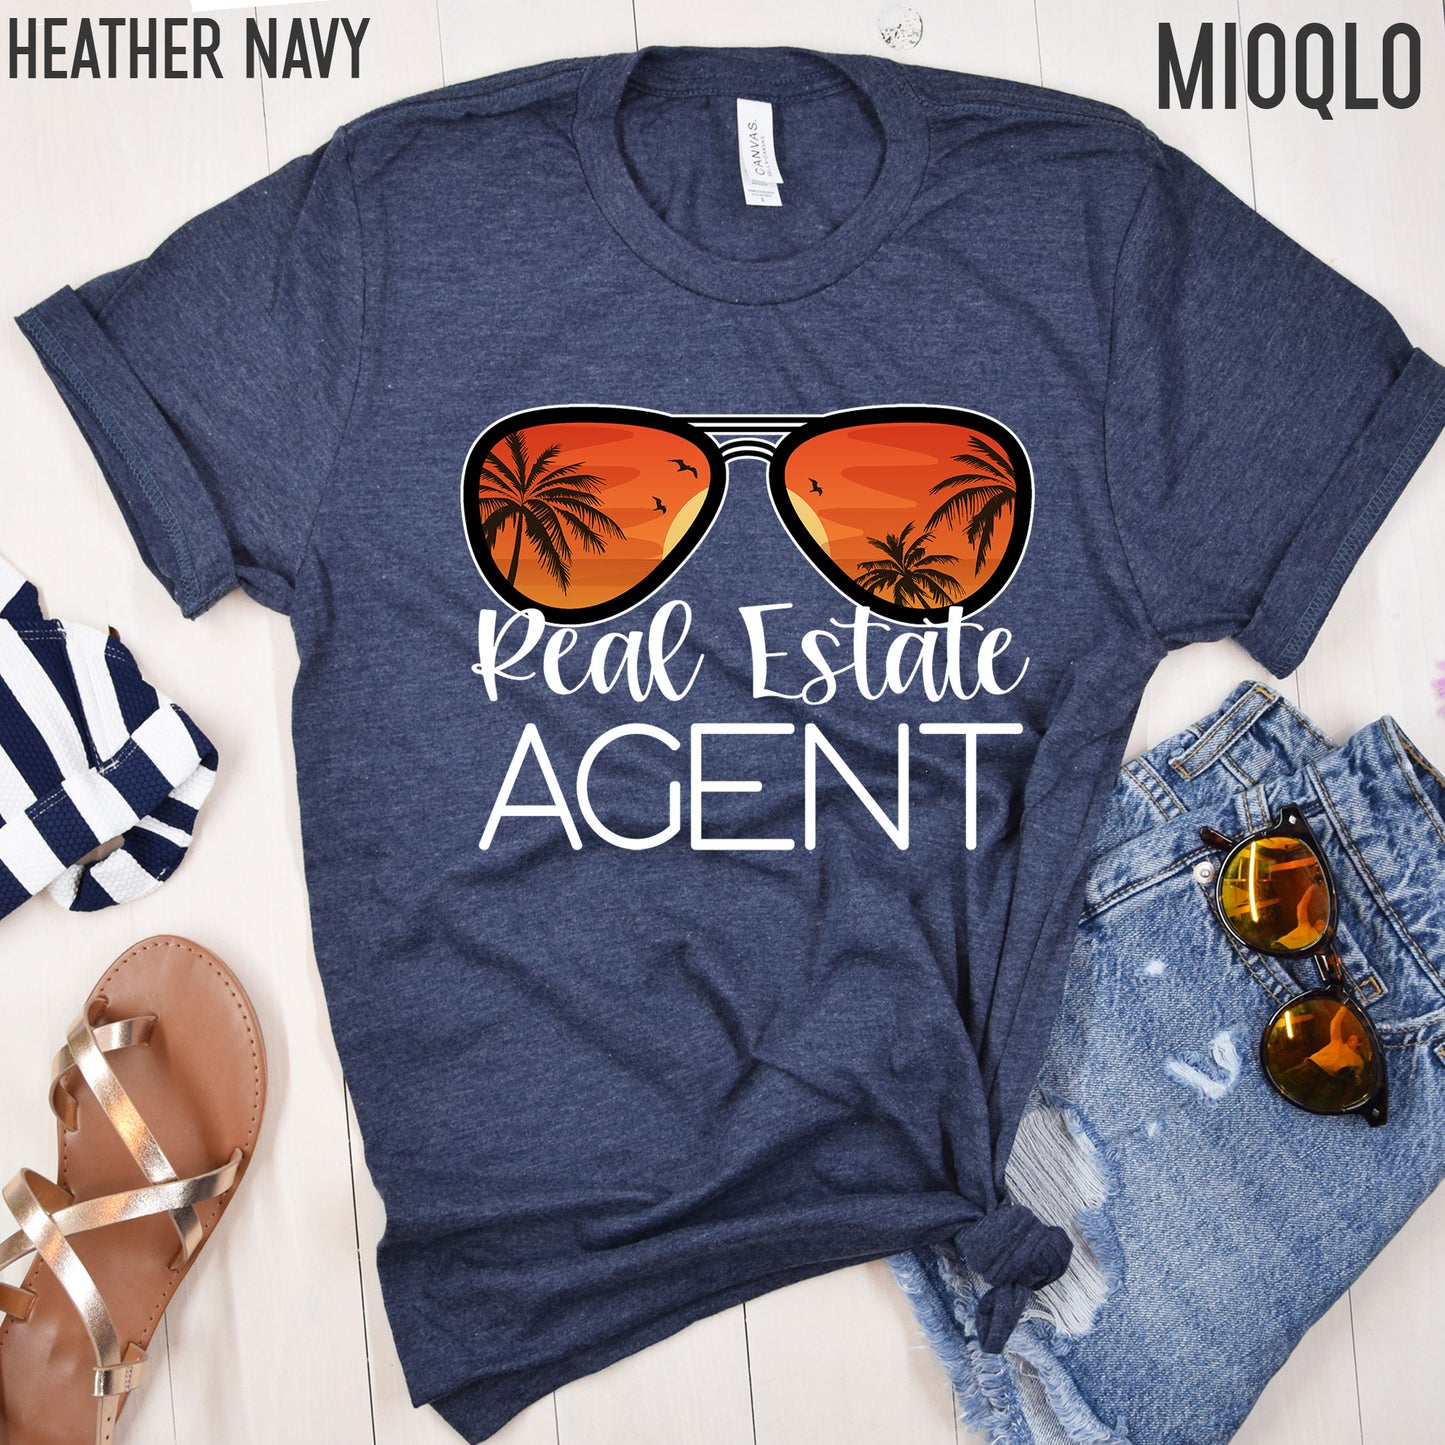 Real Estate Agent Sunset Sunglasses Shirt, Mortgage Lender Shirt, Vacation Holiday Orange Thank You Real Estate Loan Officer Realtor Gift Bday Tee